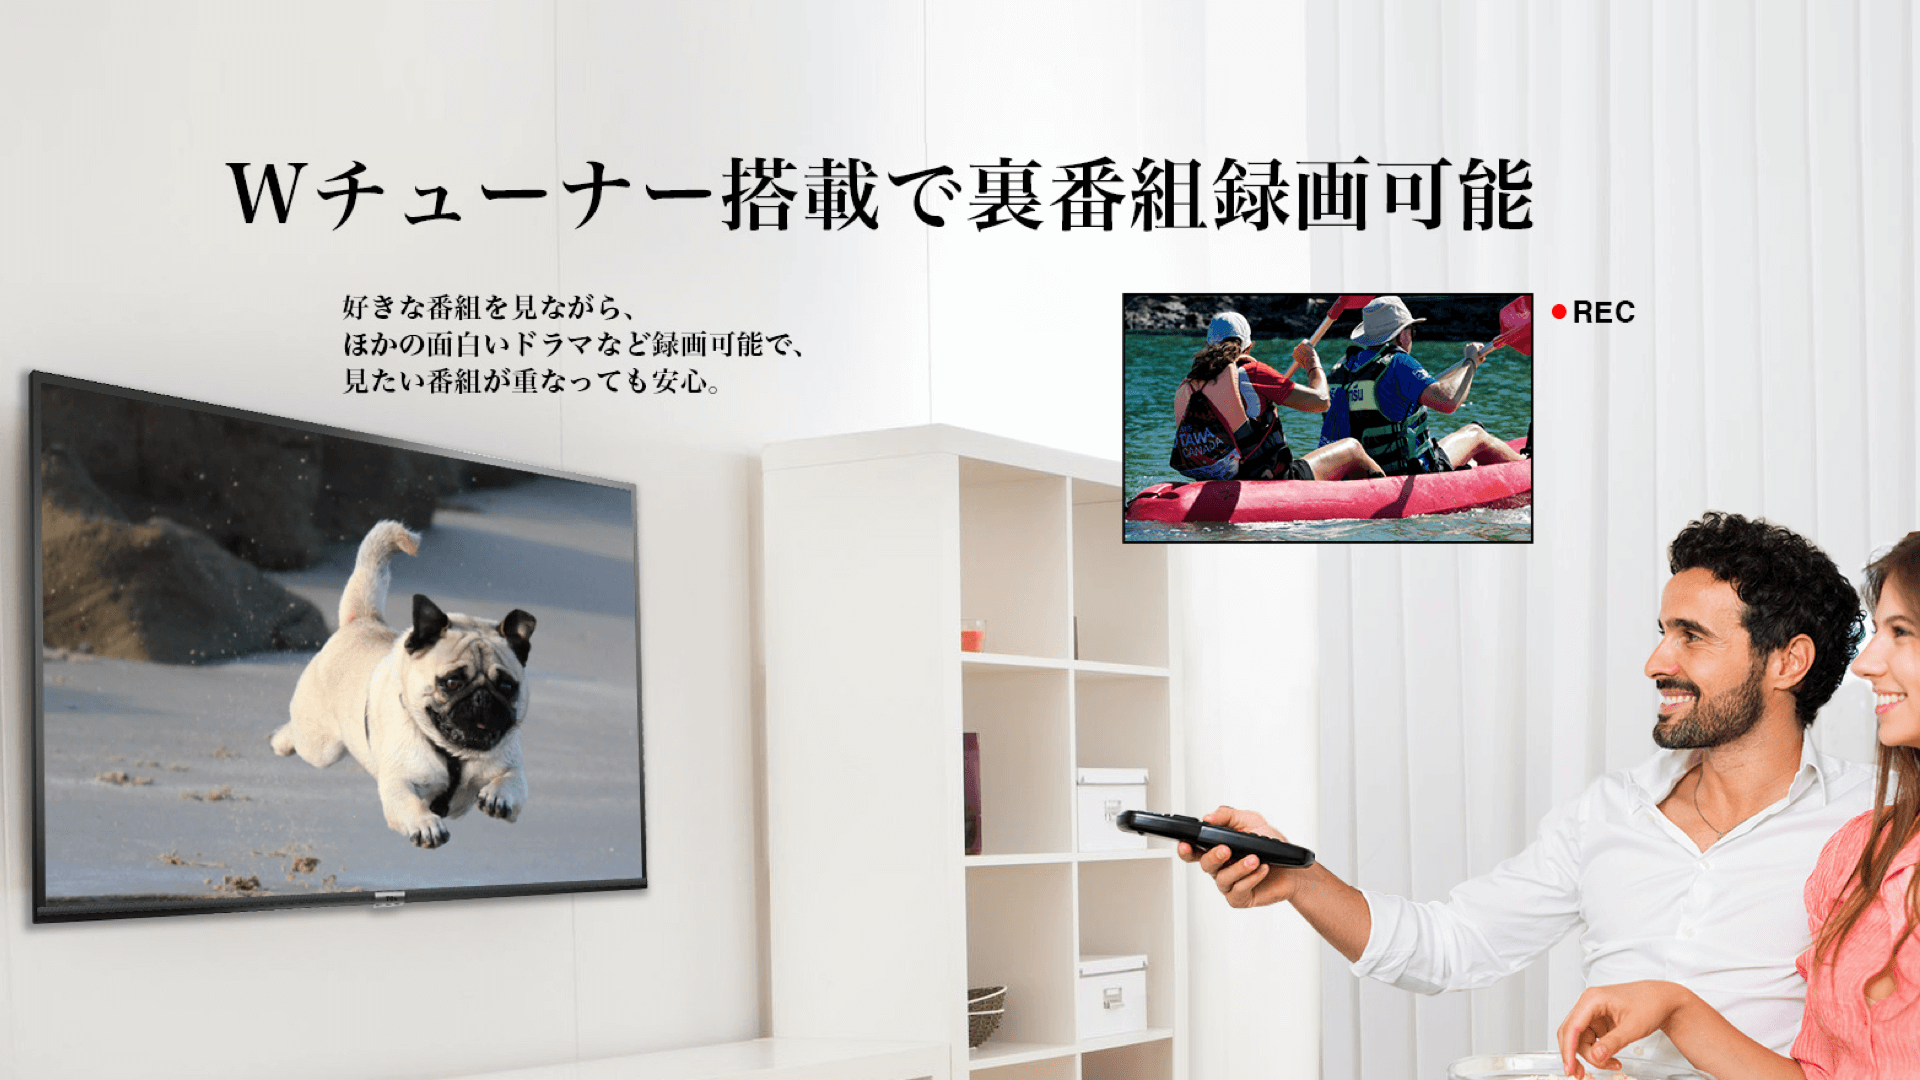 TCL s515 外付けHDDで裏録画が可能